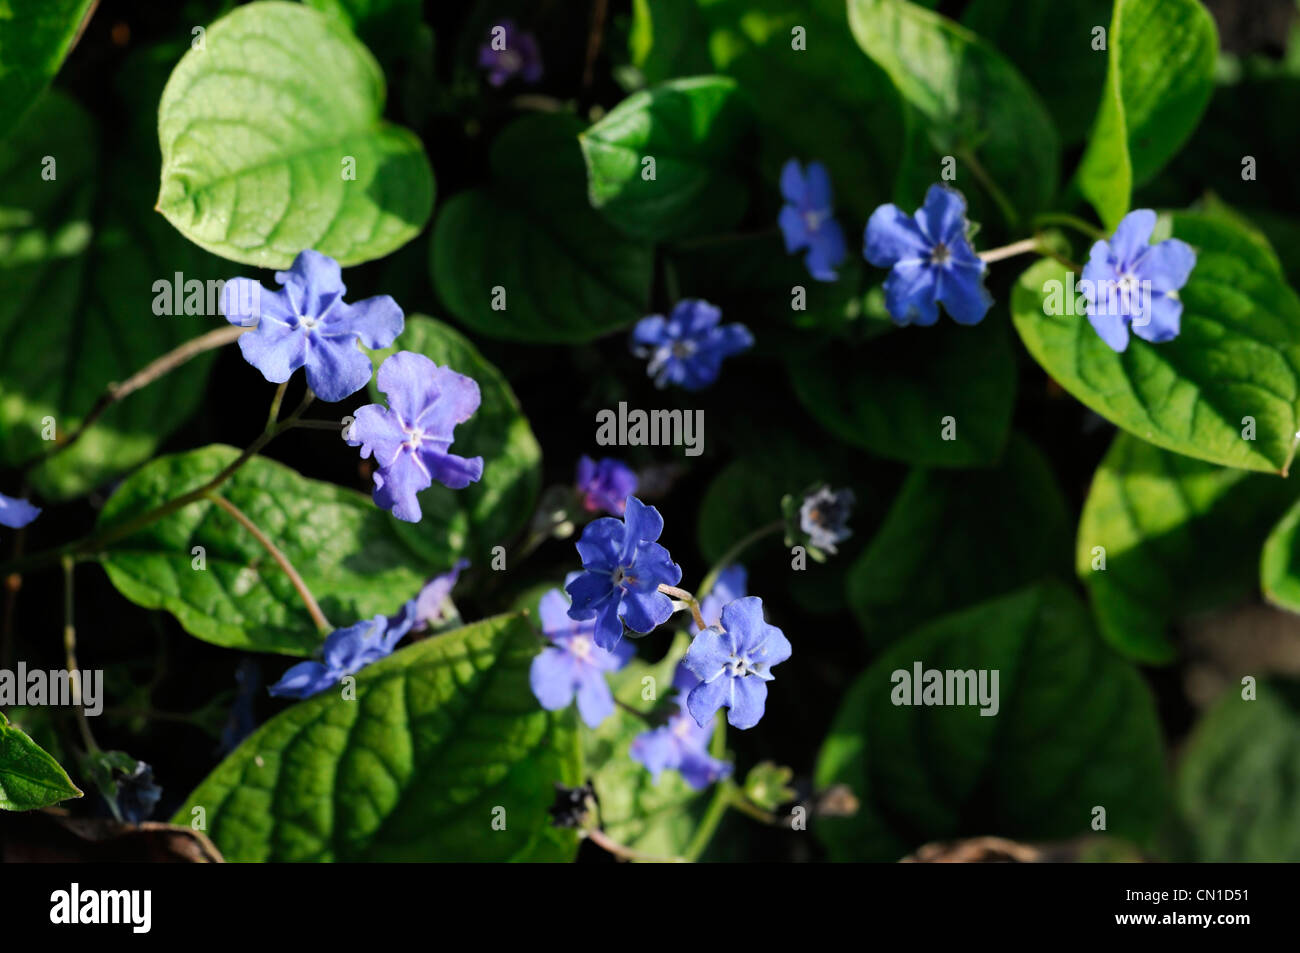 omphalodes verna navelwort spring plant portraits turquoise blue flowers petals closeup perennials hardy blooms blossoms Stock Photo